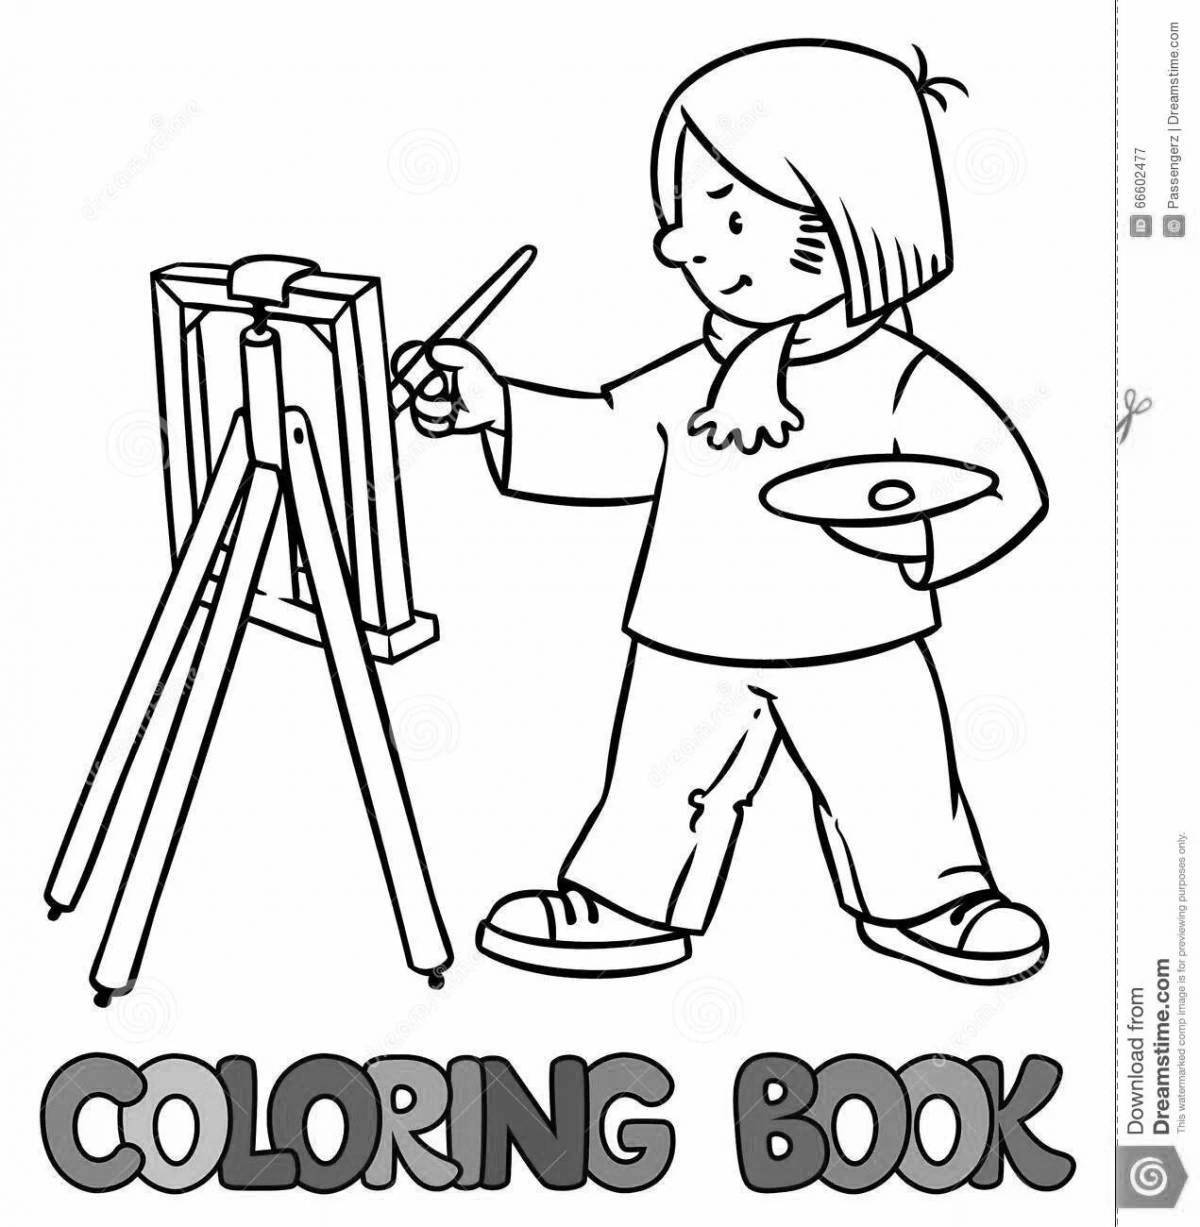 Great coloring artist profession